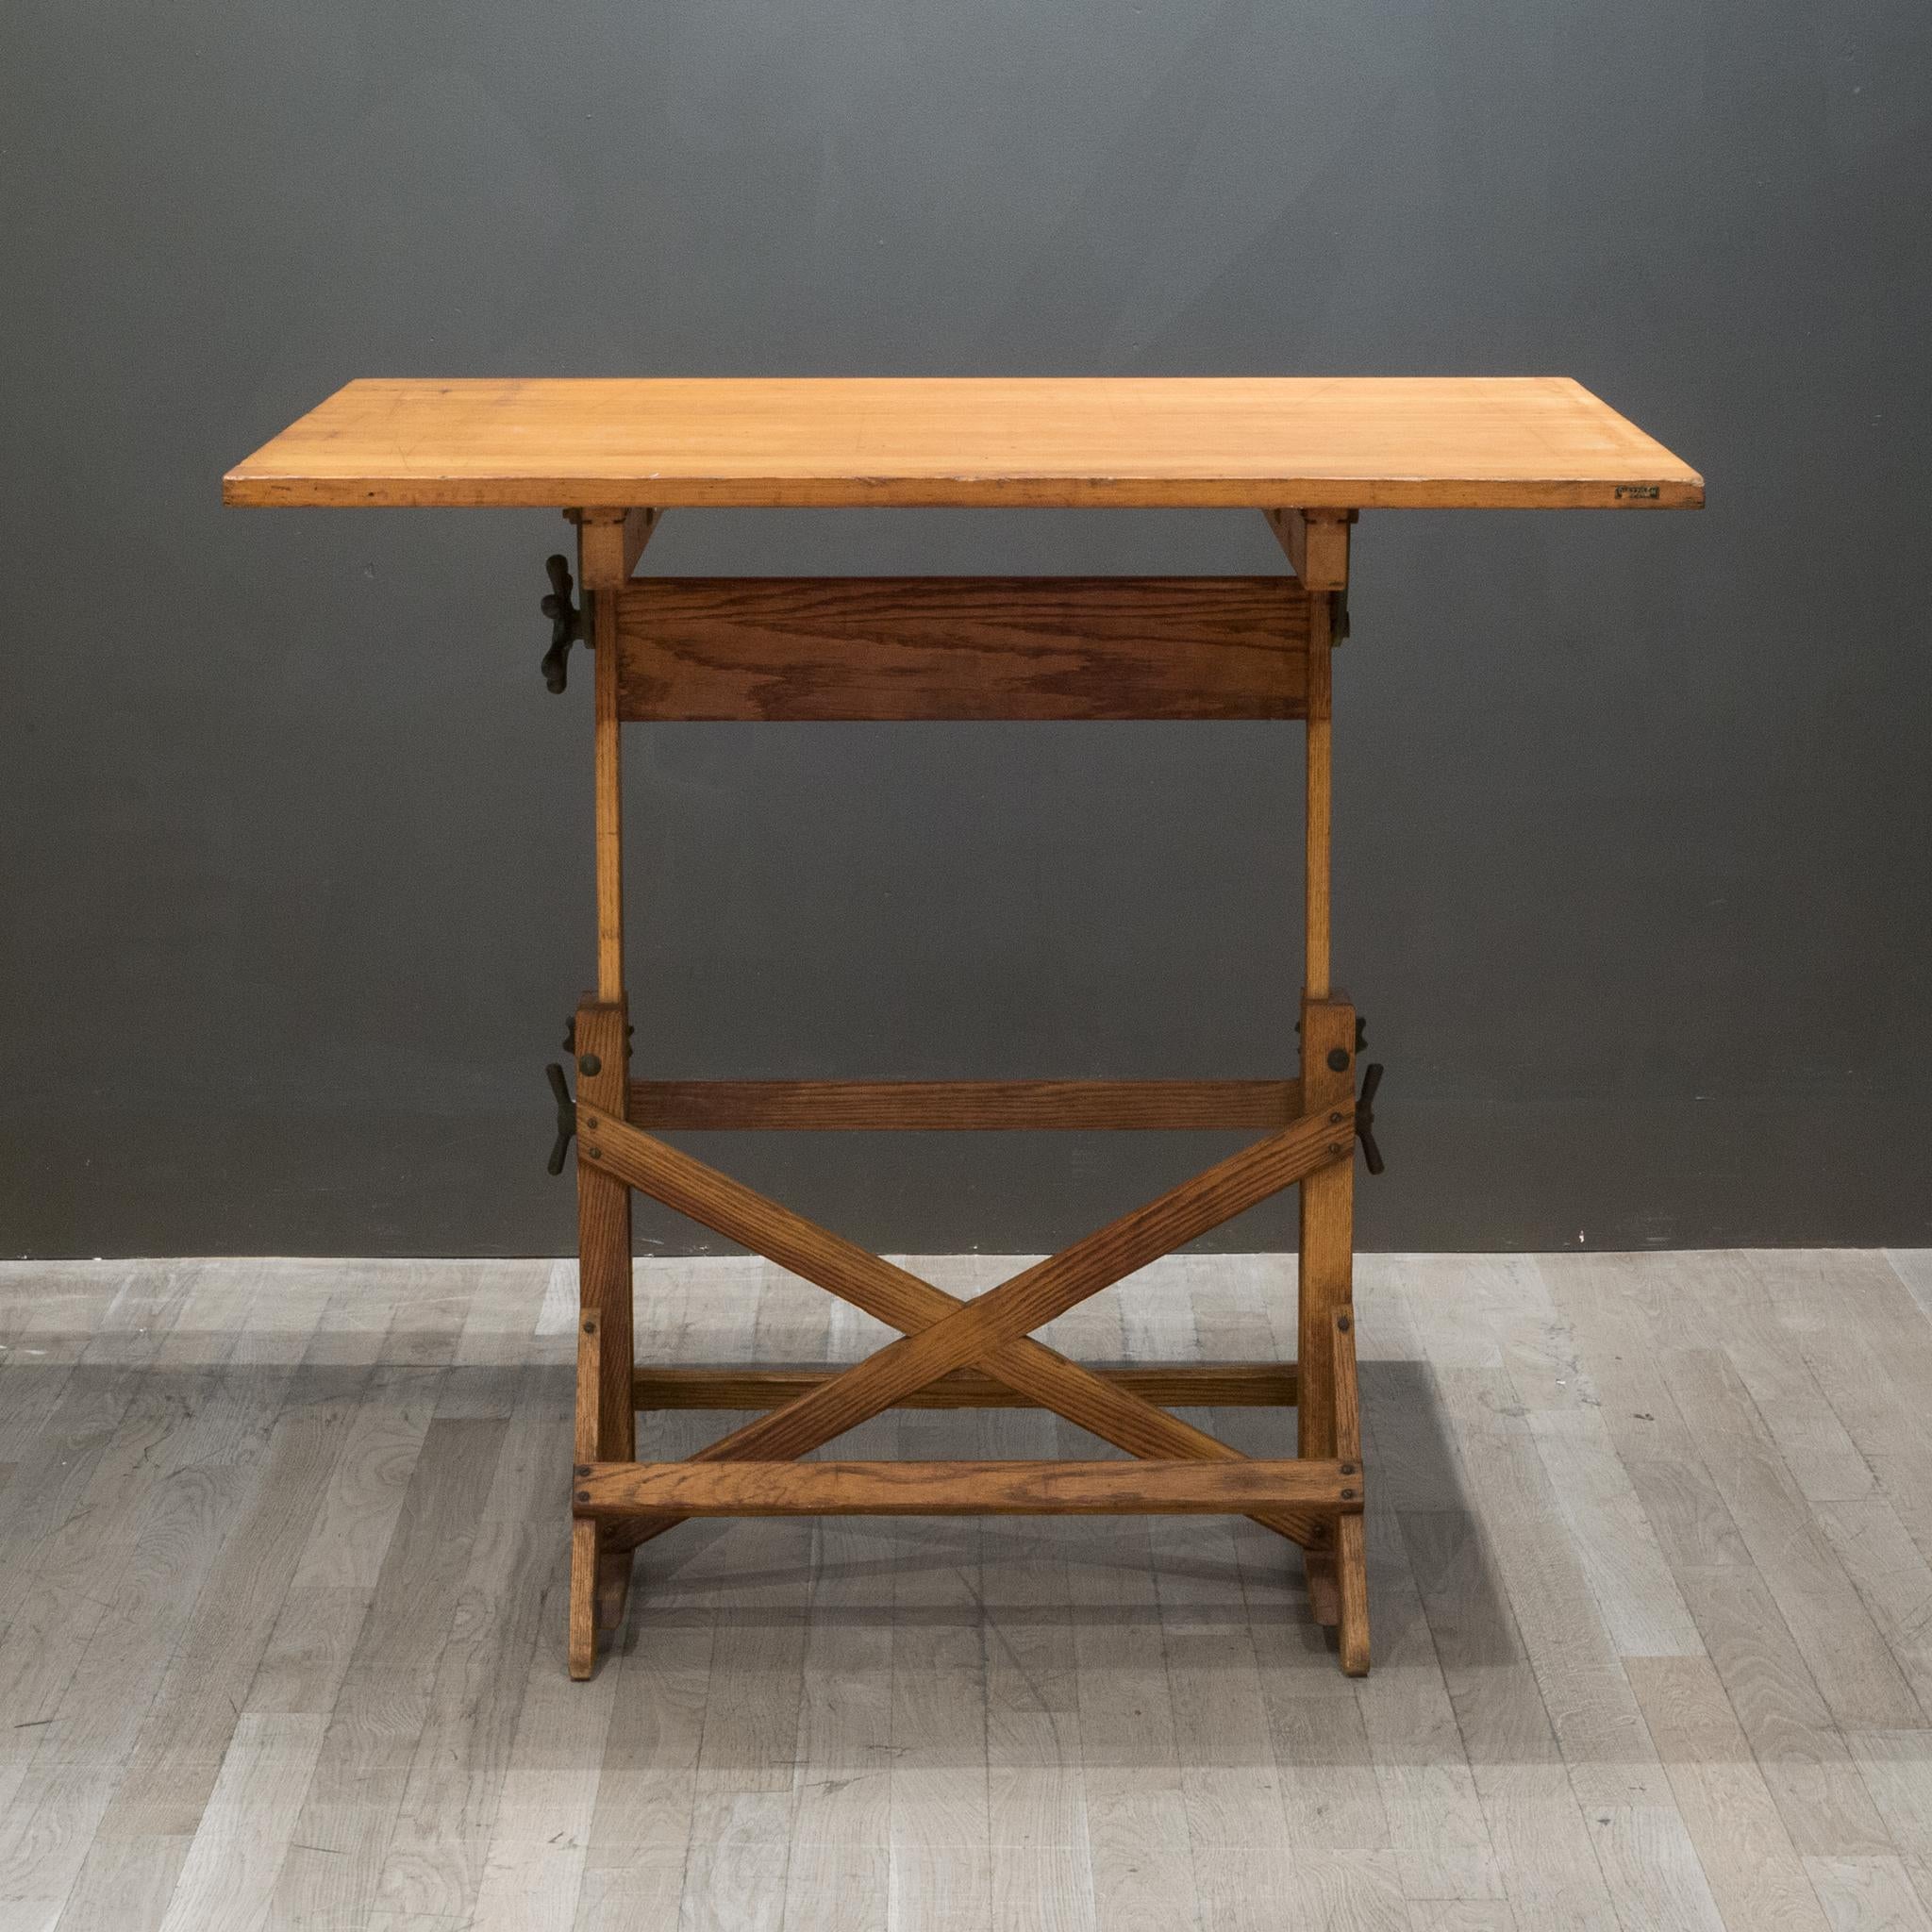 20th Century Antique Wood and Cast Iron Drafting Table c.1930